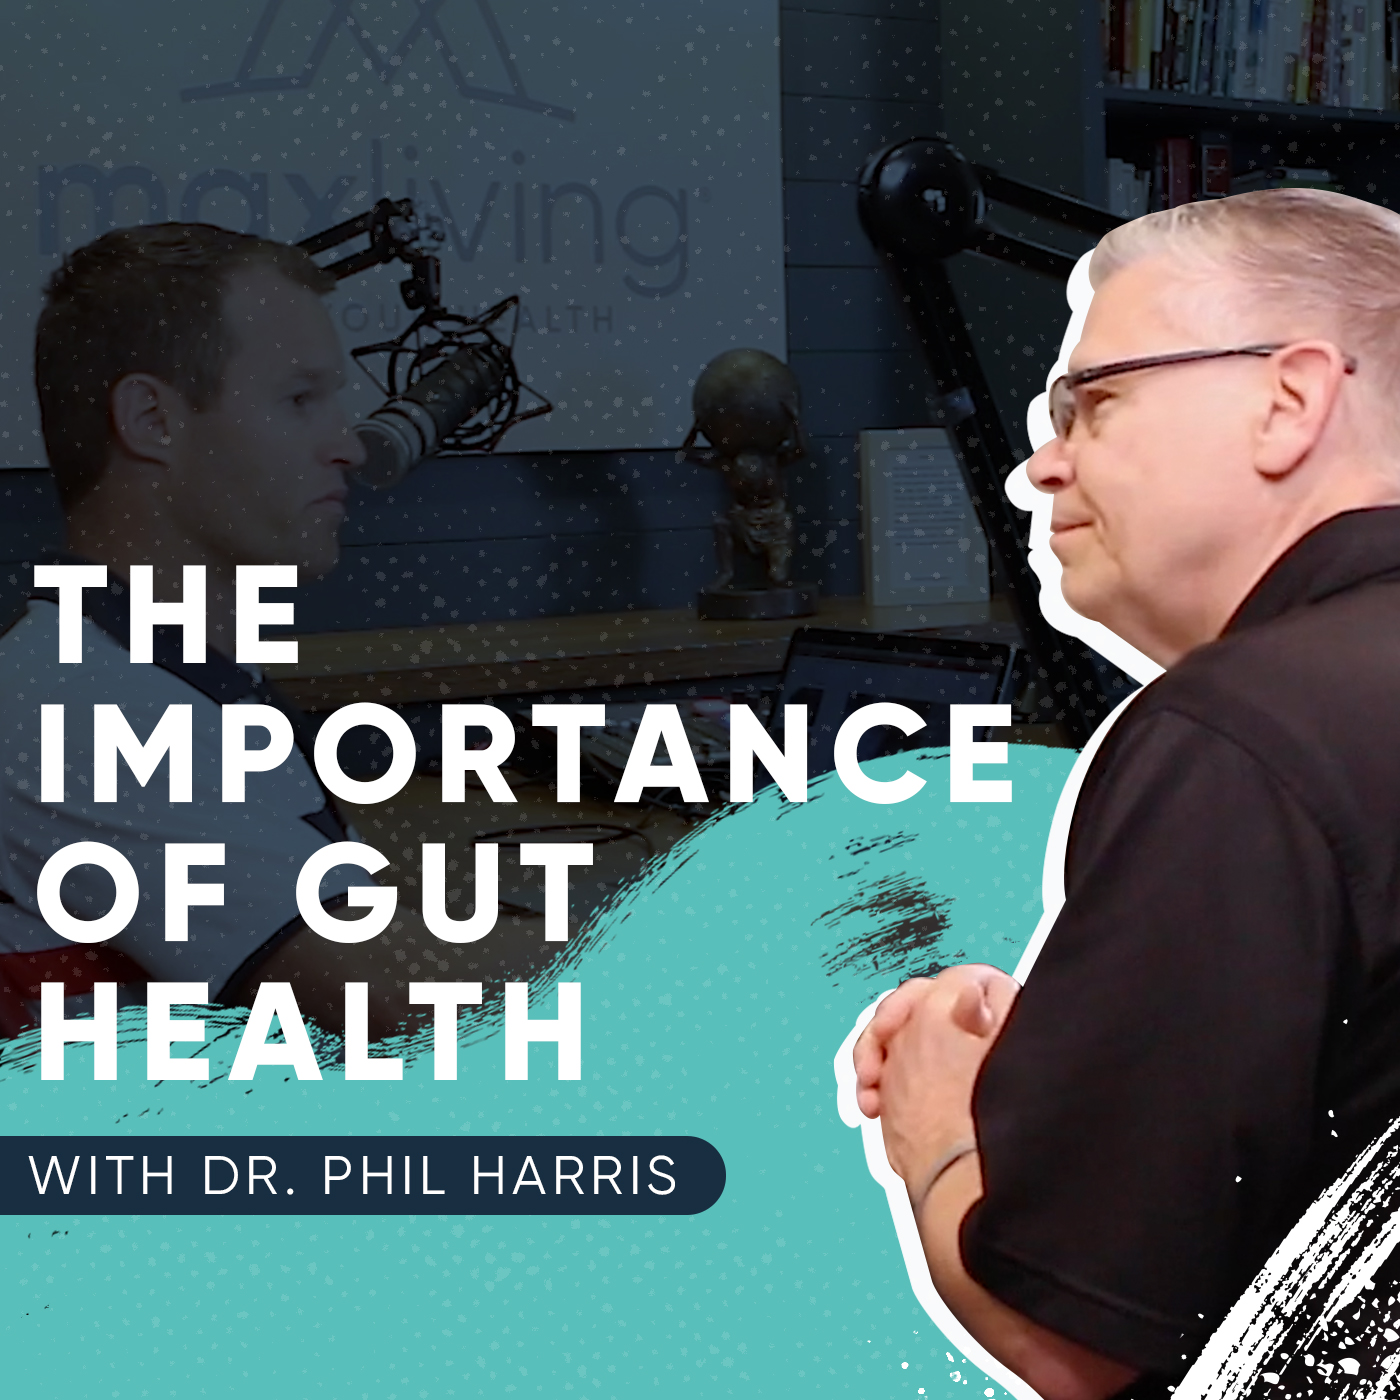 Episode 18 - The Importance of Gut Health with Dr. Phil Harris